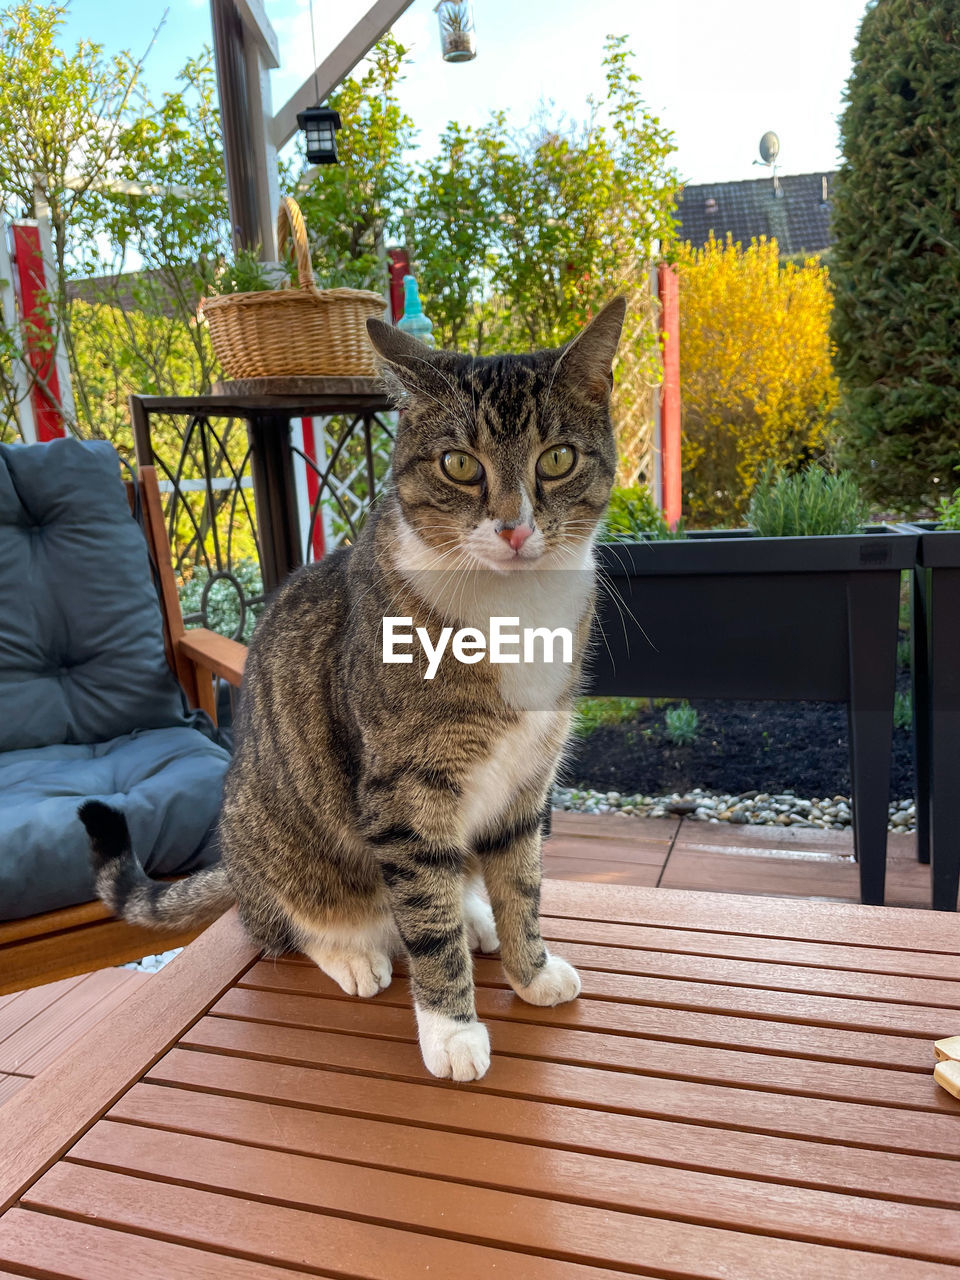 pet, domestic animals, mammal, animal, animal themes, cat, domestic cat, feline, one animal, sitting, looking at camera, tree, portrait, table, plant, wood, day, seat, no people, full length, felidae, chair, nature, front or back yard, relaxation, small to medium-sized cats, tabby cat, outdoors